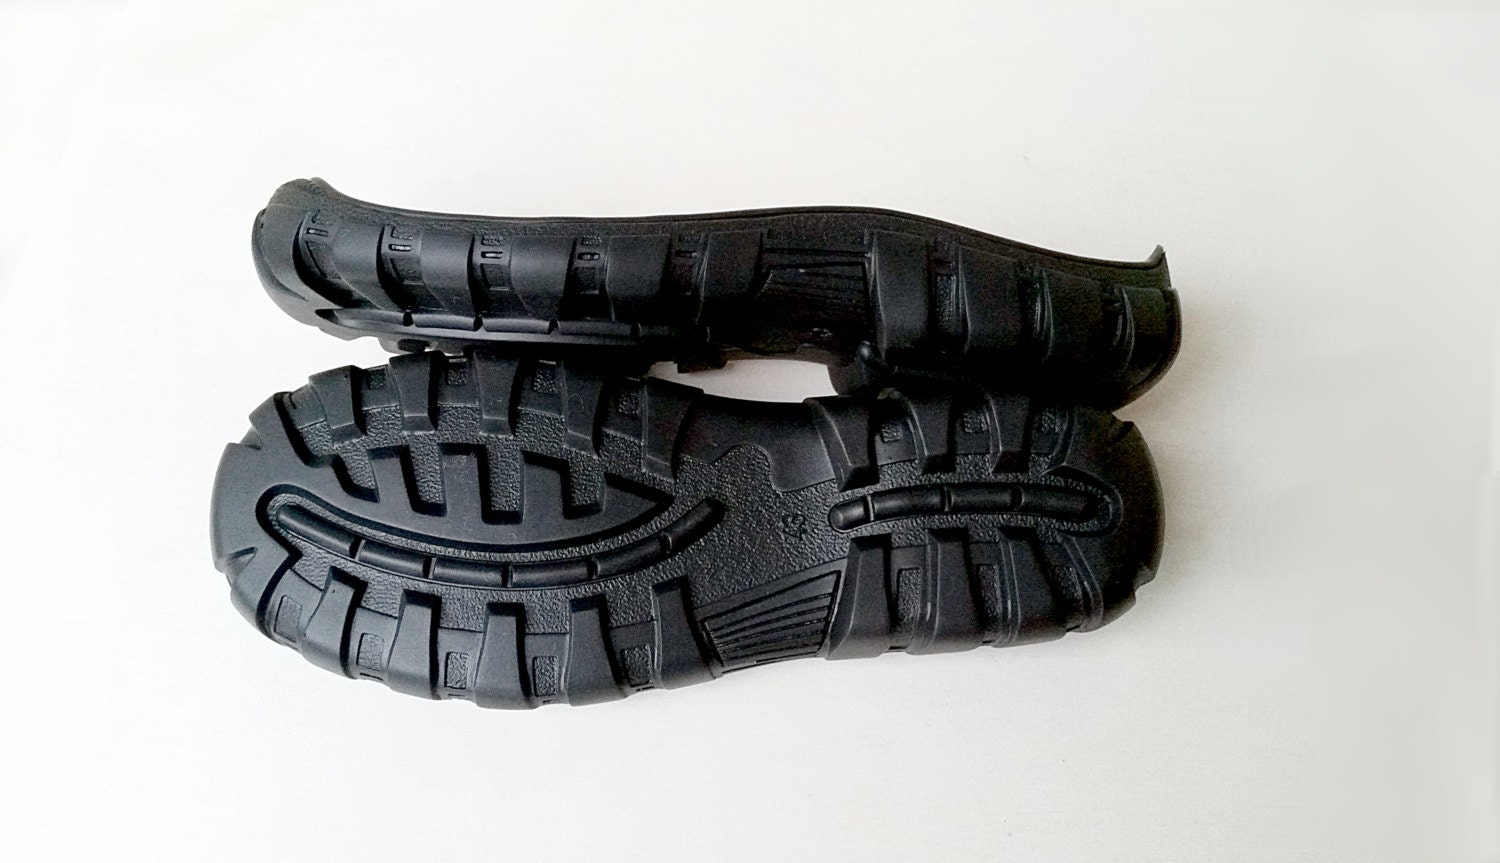 Rubber Outsoles for Your Custom Made Shoes, Soles for Crotchet